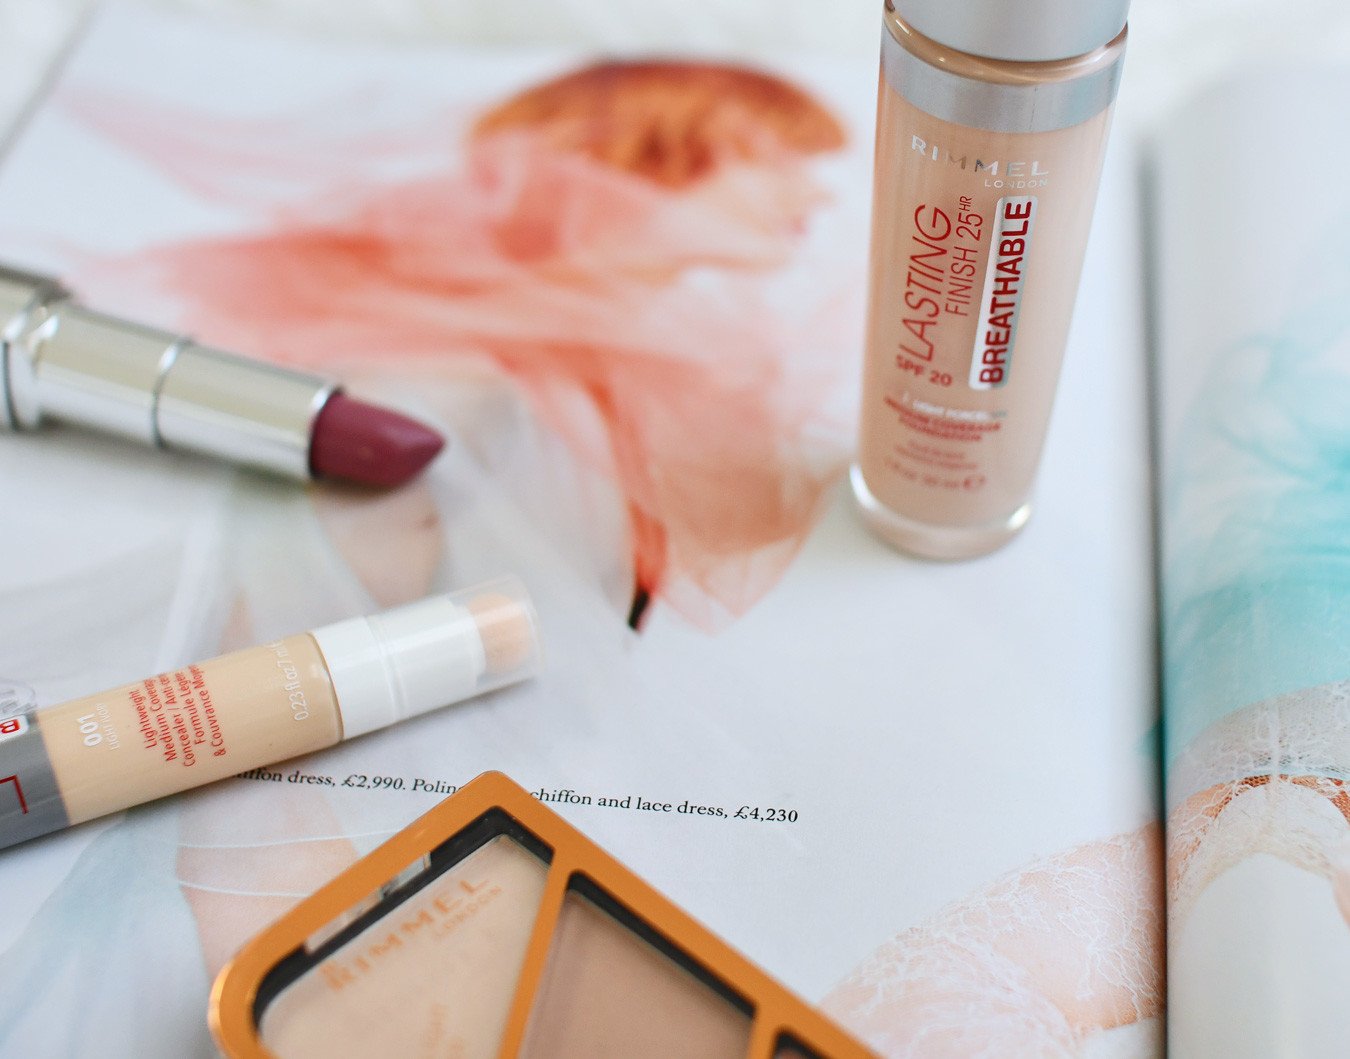 Rimmel Lasting Finish Breathable Foundation and Concealer review